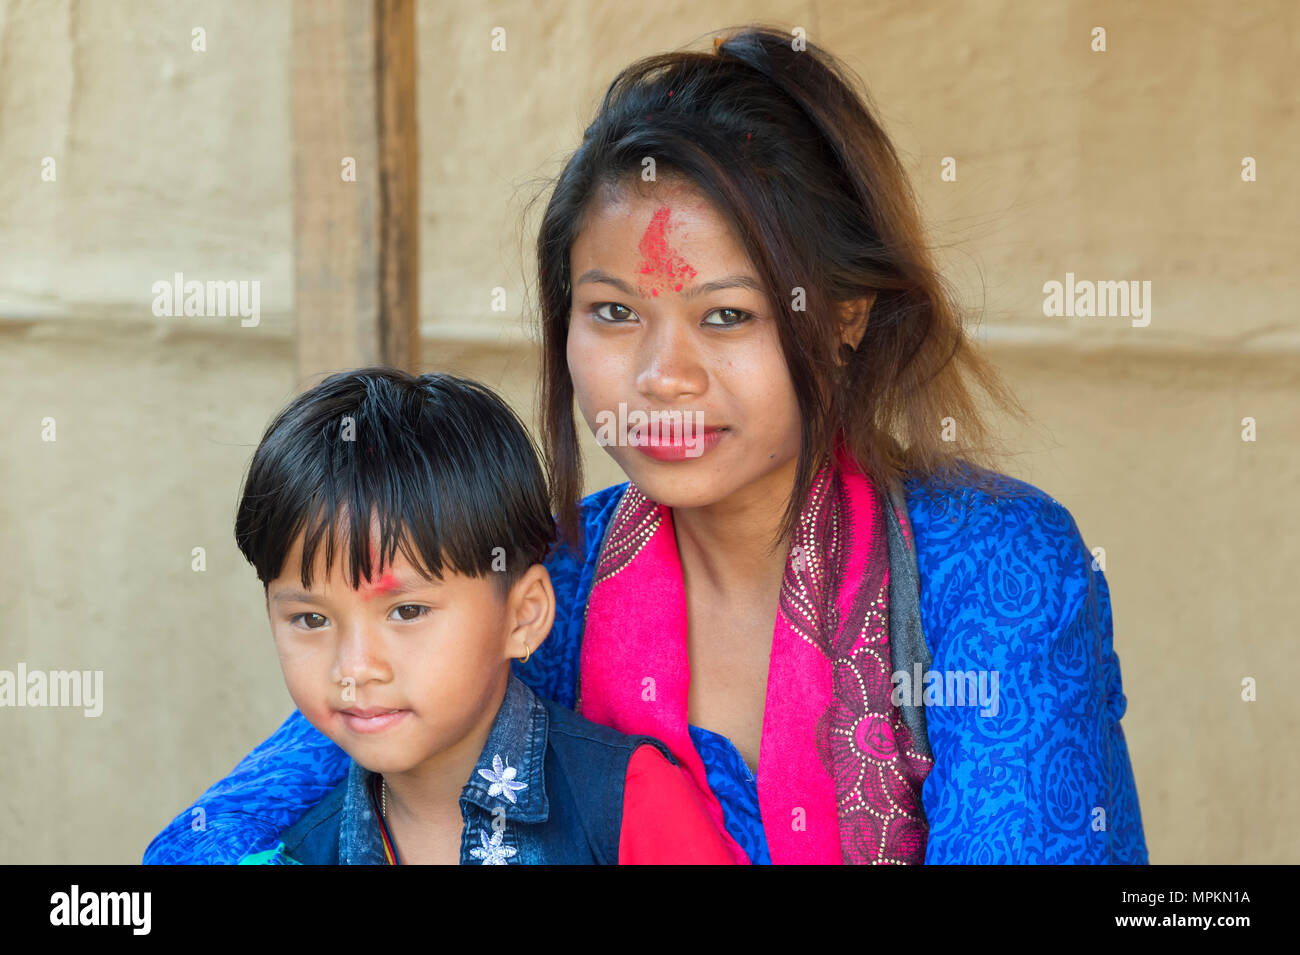 Nepalese woman with her son from the Tharu ethnic group, portrait, Chitwan, Nepal Stock Photo